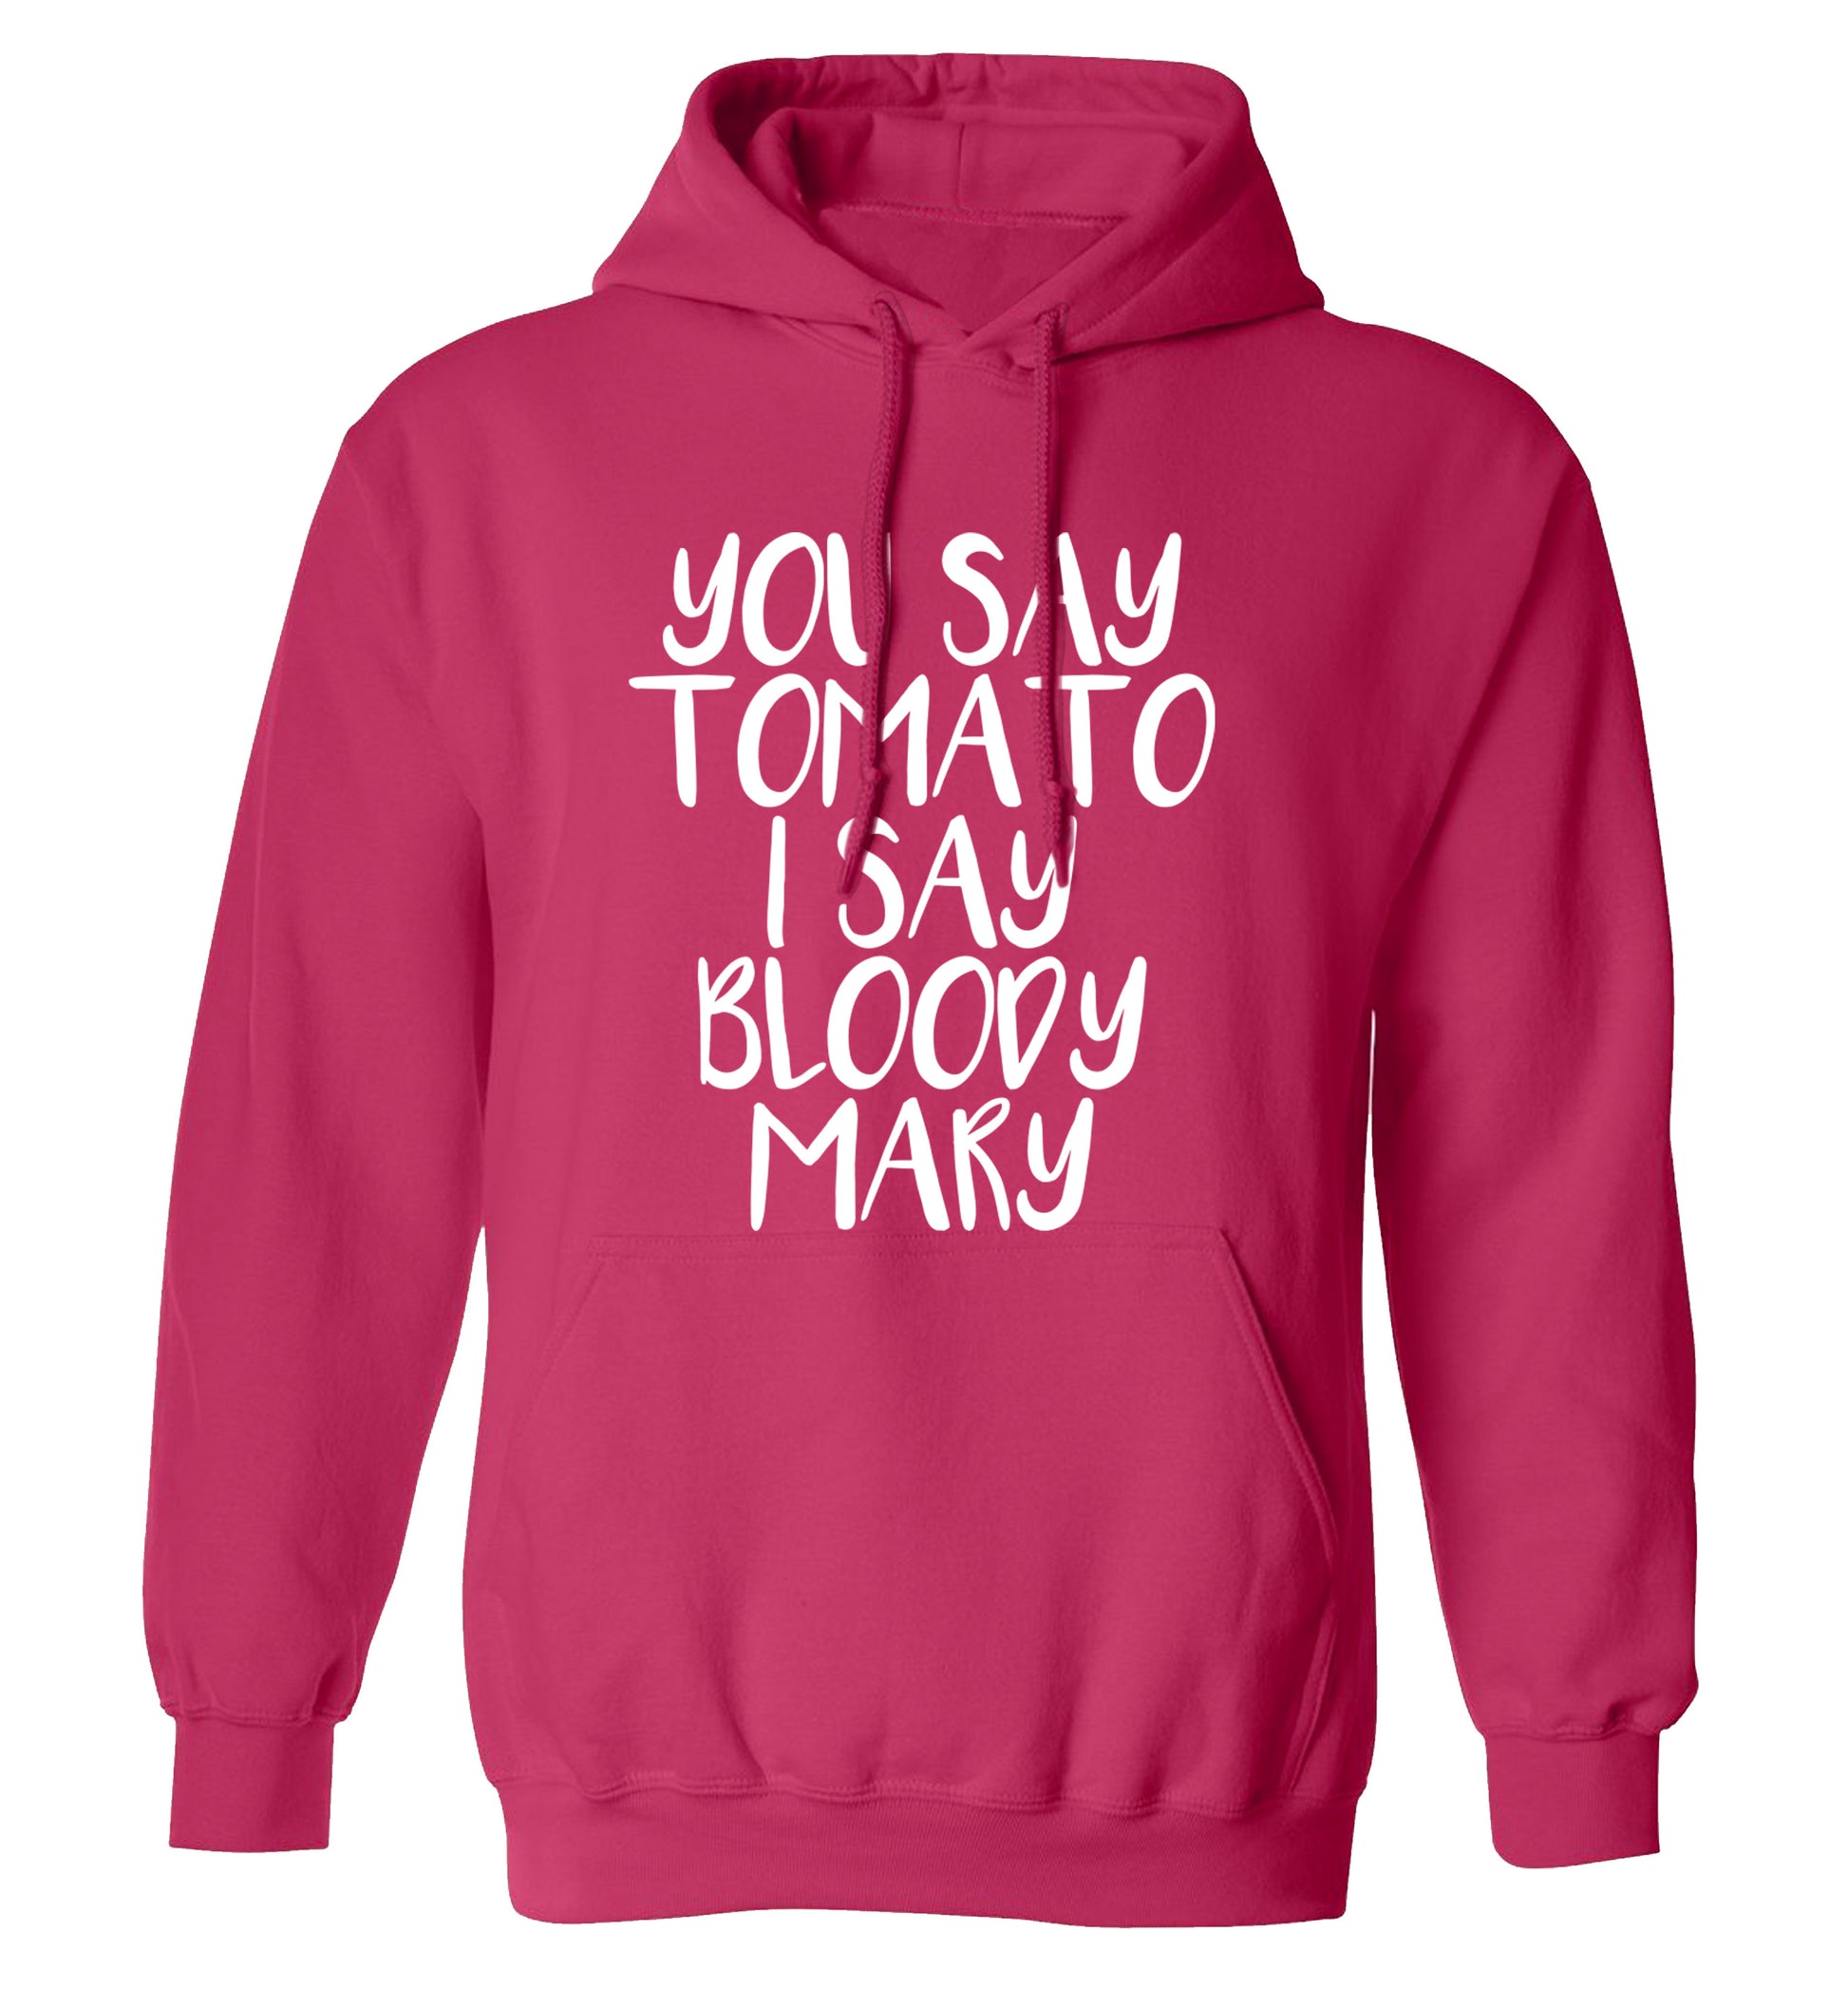 You say tomato I say bloody mary adults unisex pink hoodie 2XL